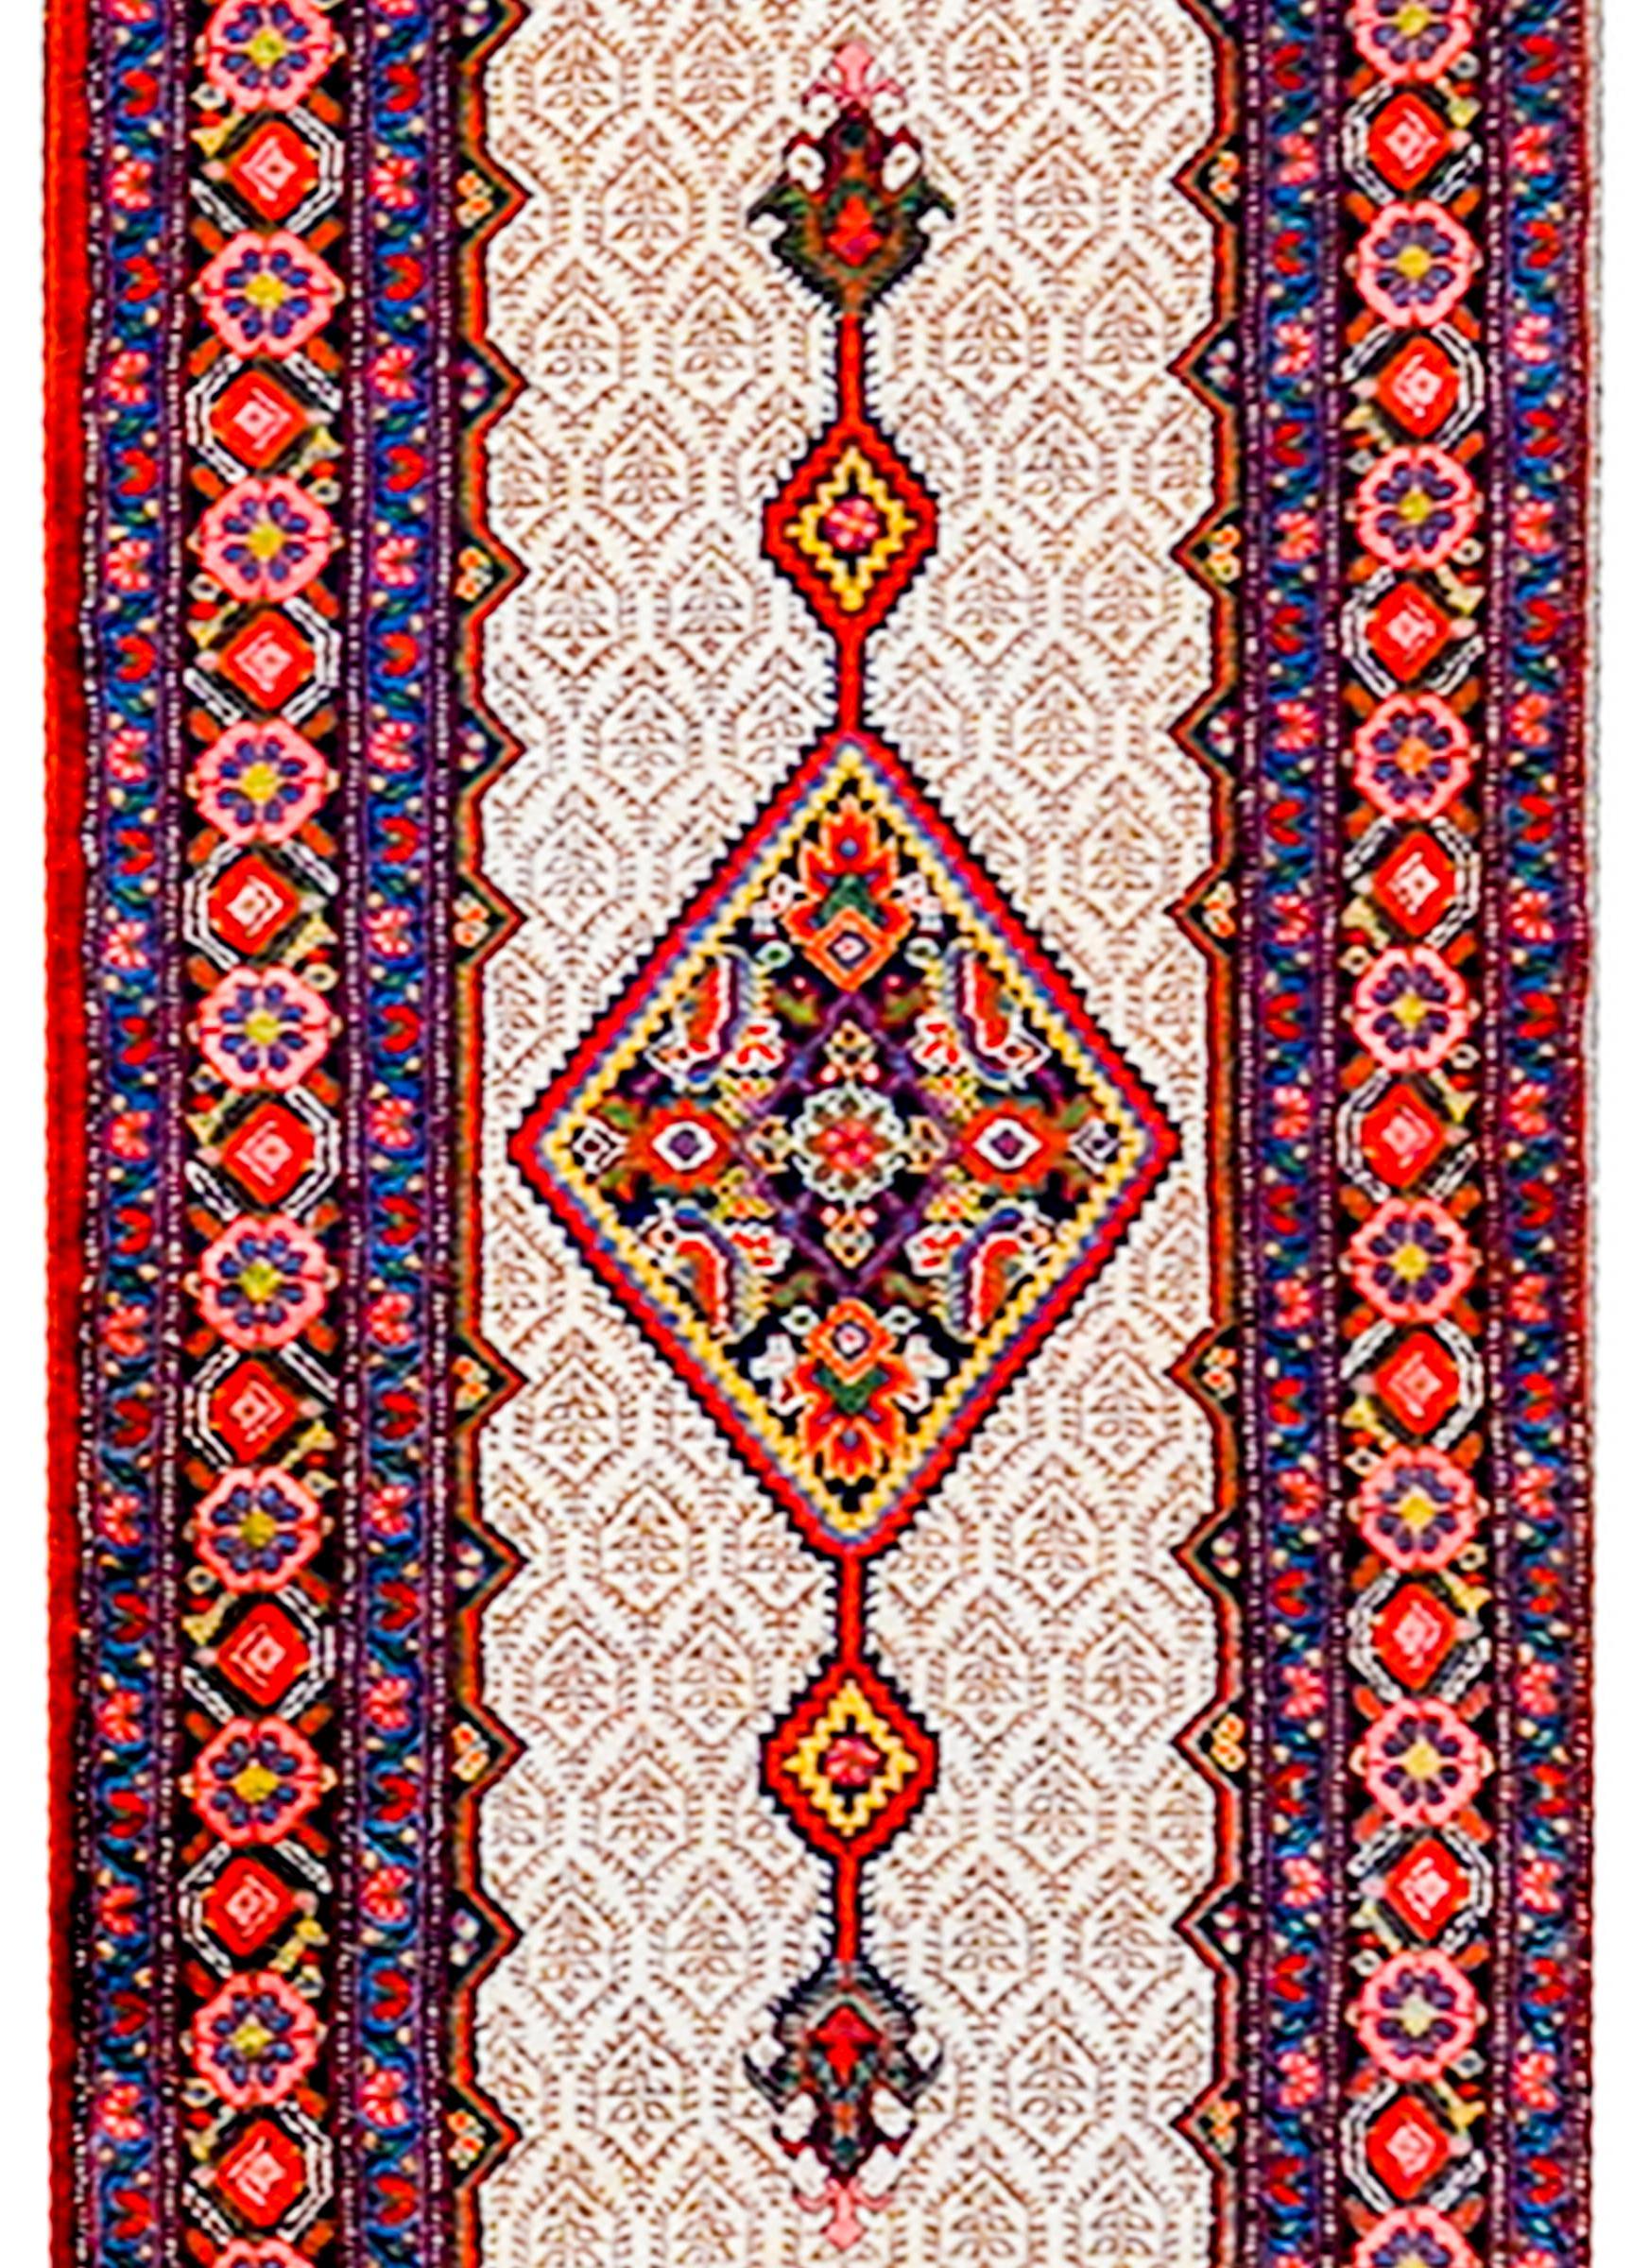 An amazing early 20th century Persian Serab runner with three large diamond medallions flanked by smaller diamond medallions amidst a camel-colored tone-on-tone petite floral patterned field. The border is wonderful with a beautiful large-scale